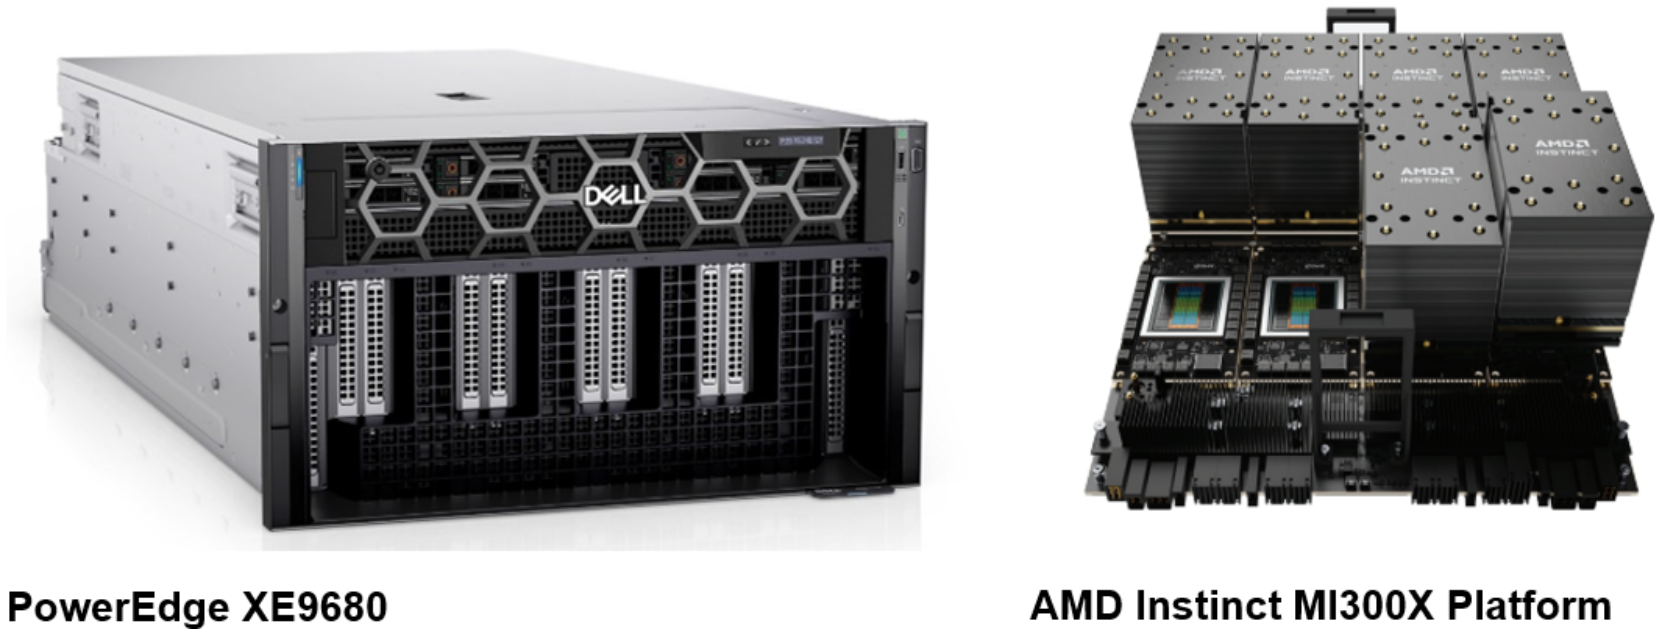 An image showing PowerEdge XE9680 chassis on the left and the AMD Instinct MI300X Platform on the right